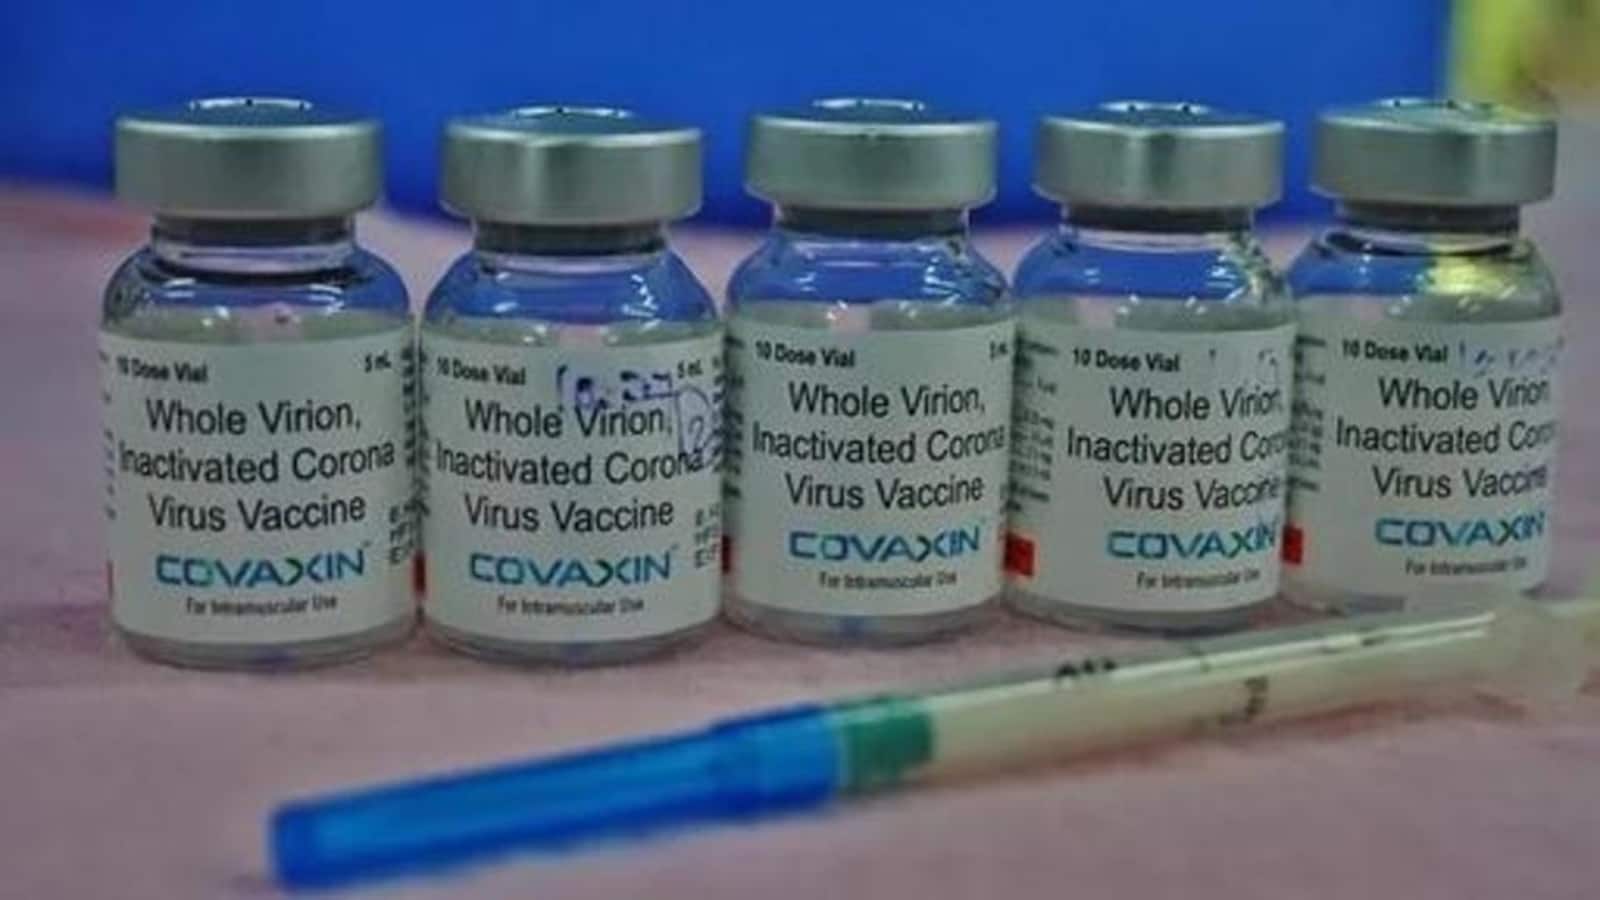 Will Indian students in US be asked to get Covid vaccines again? All you need to know | Latest News India - Hindustan Times